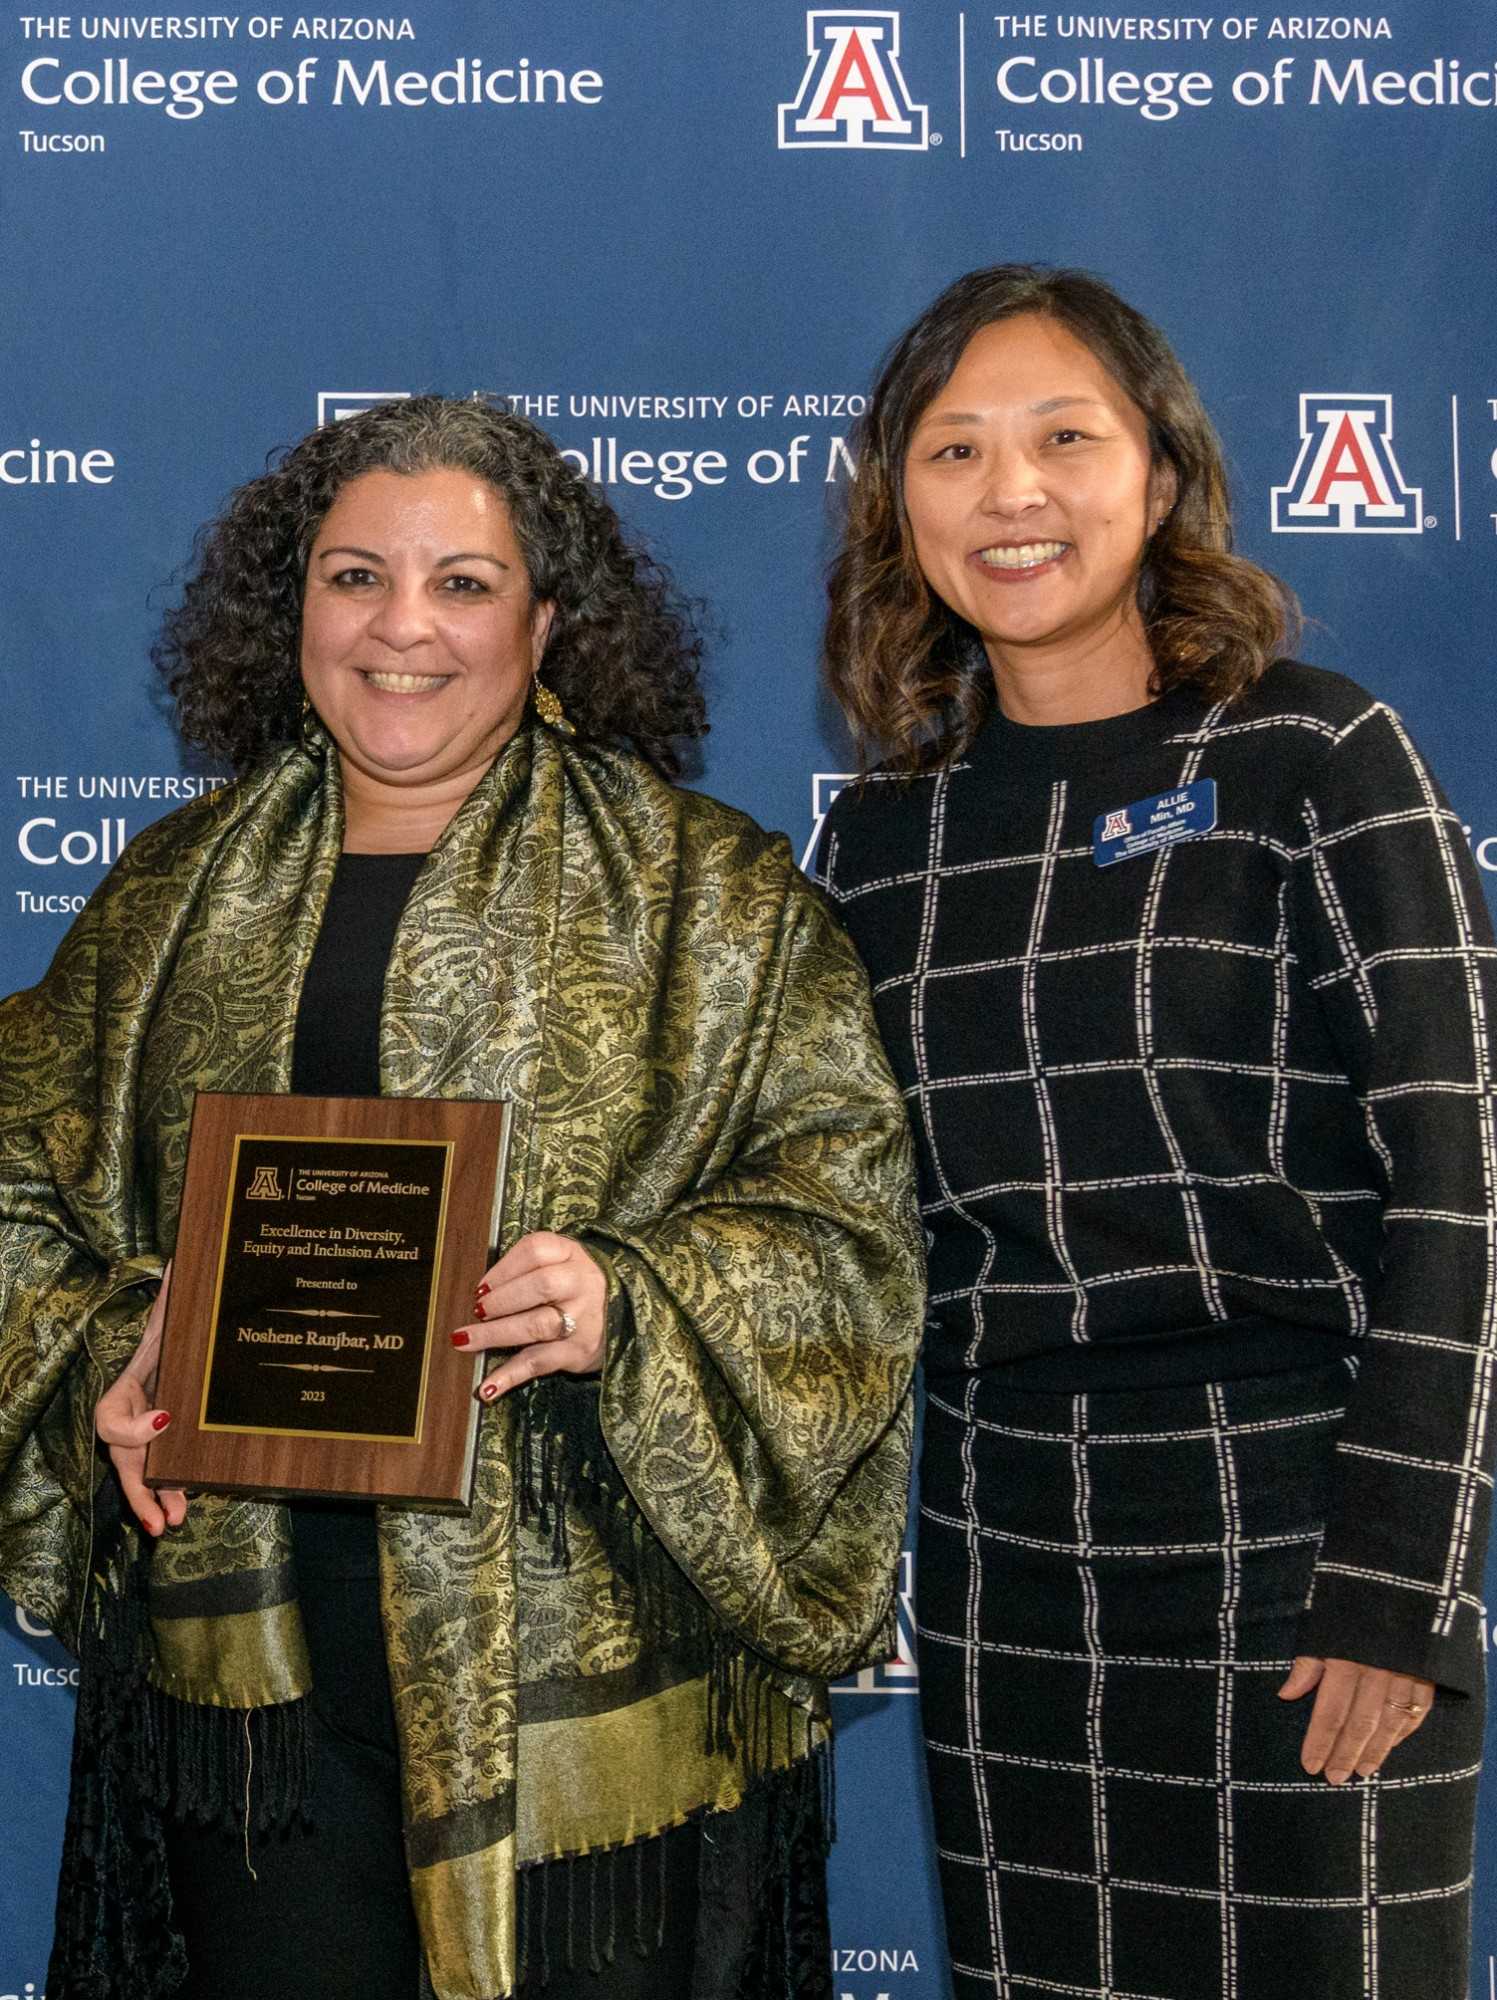 Dr. Noshene Ranjbar (left) received the College of Medicine – Tucson Faculty Excellence Award for her work in Diversity, Equity & Inclusion. (Courtesy UArizona BioCommunications) 